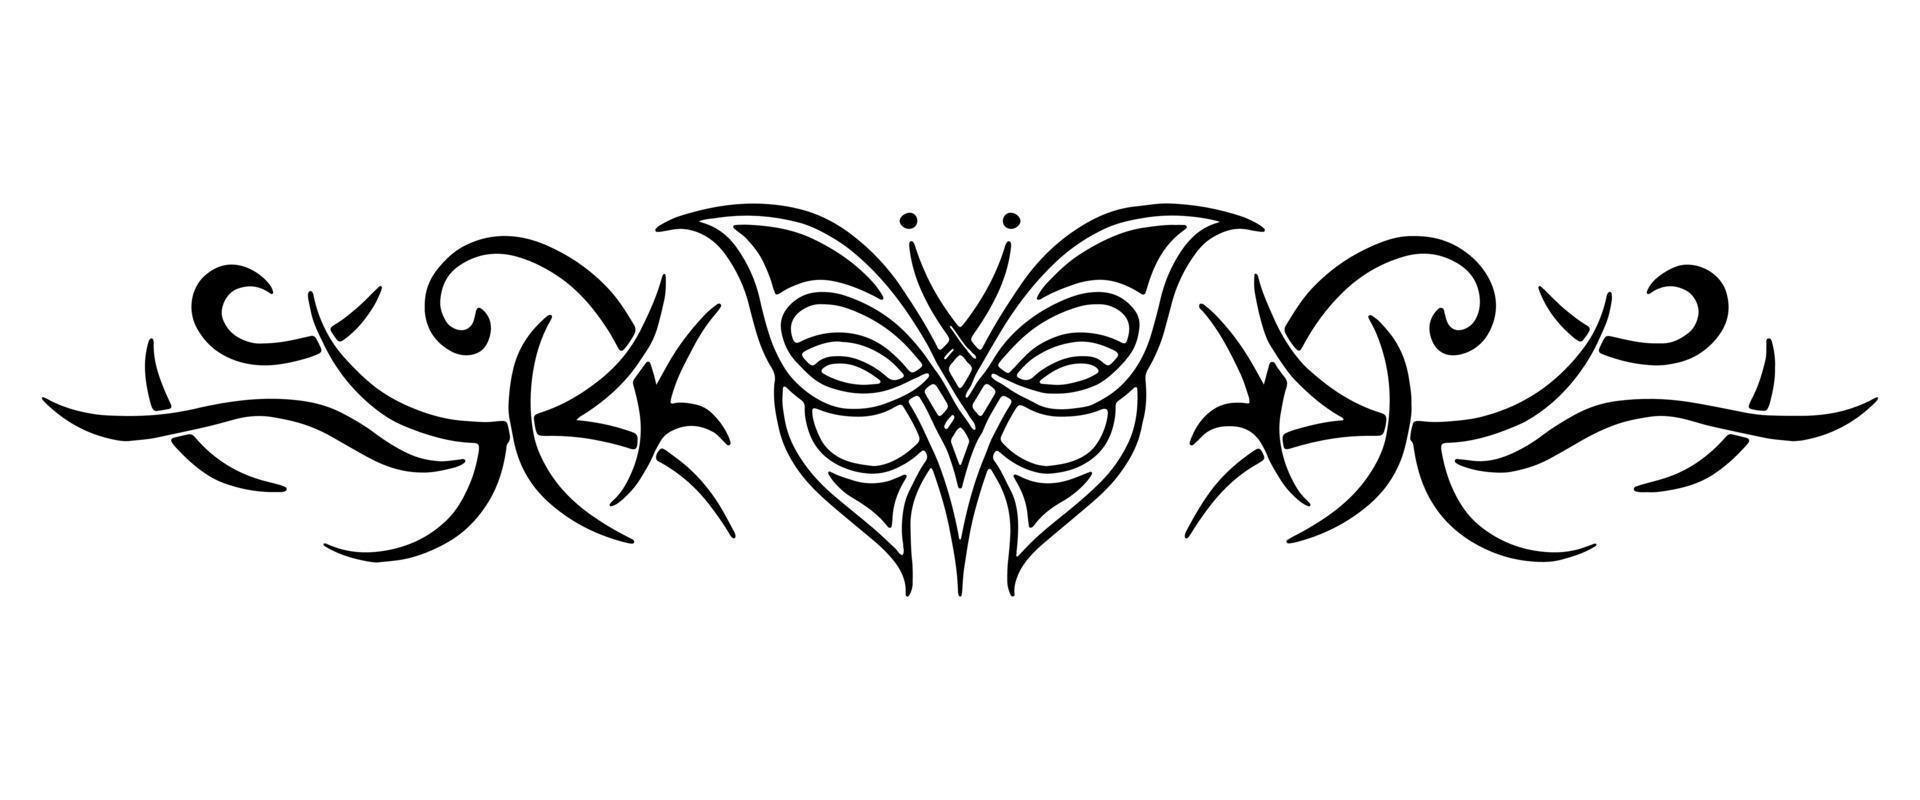 Celtic butterfly pattern. Oriental tattoo for the lower back. Girl's transferable temporary tattoo vector